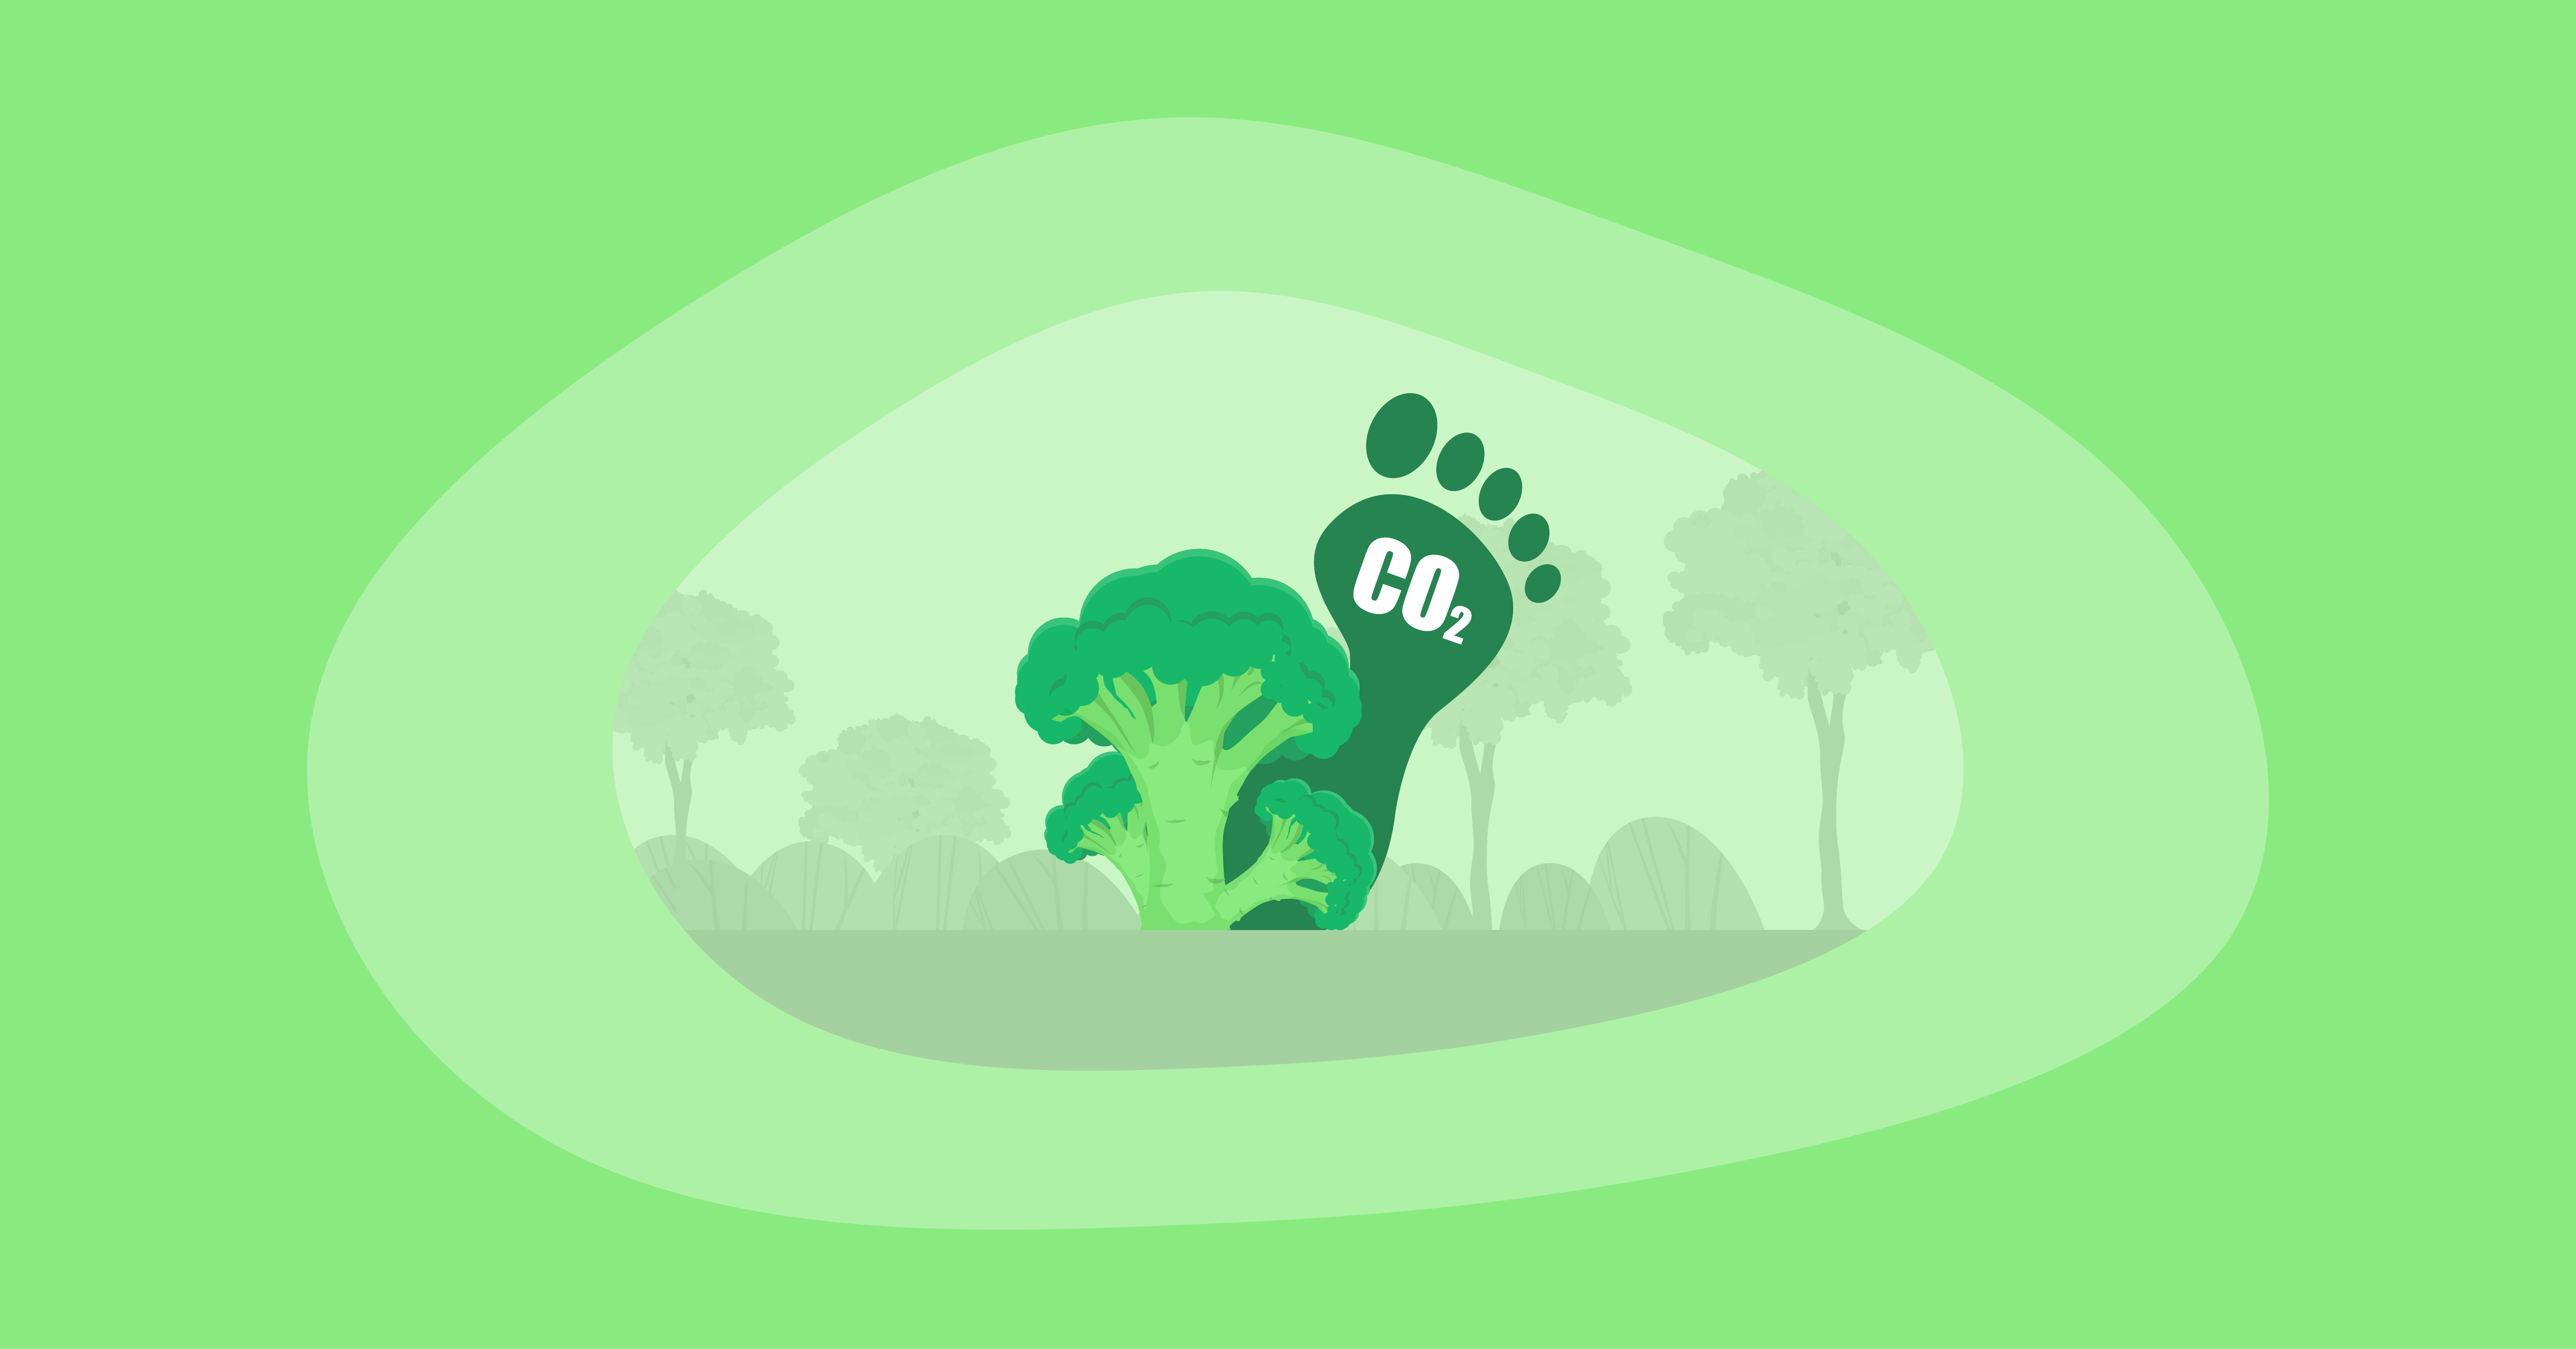 Attempted illustration of broccoli with its carbon footprint